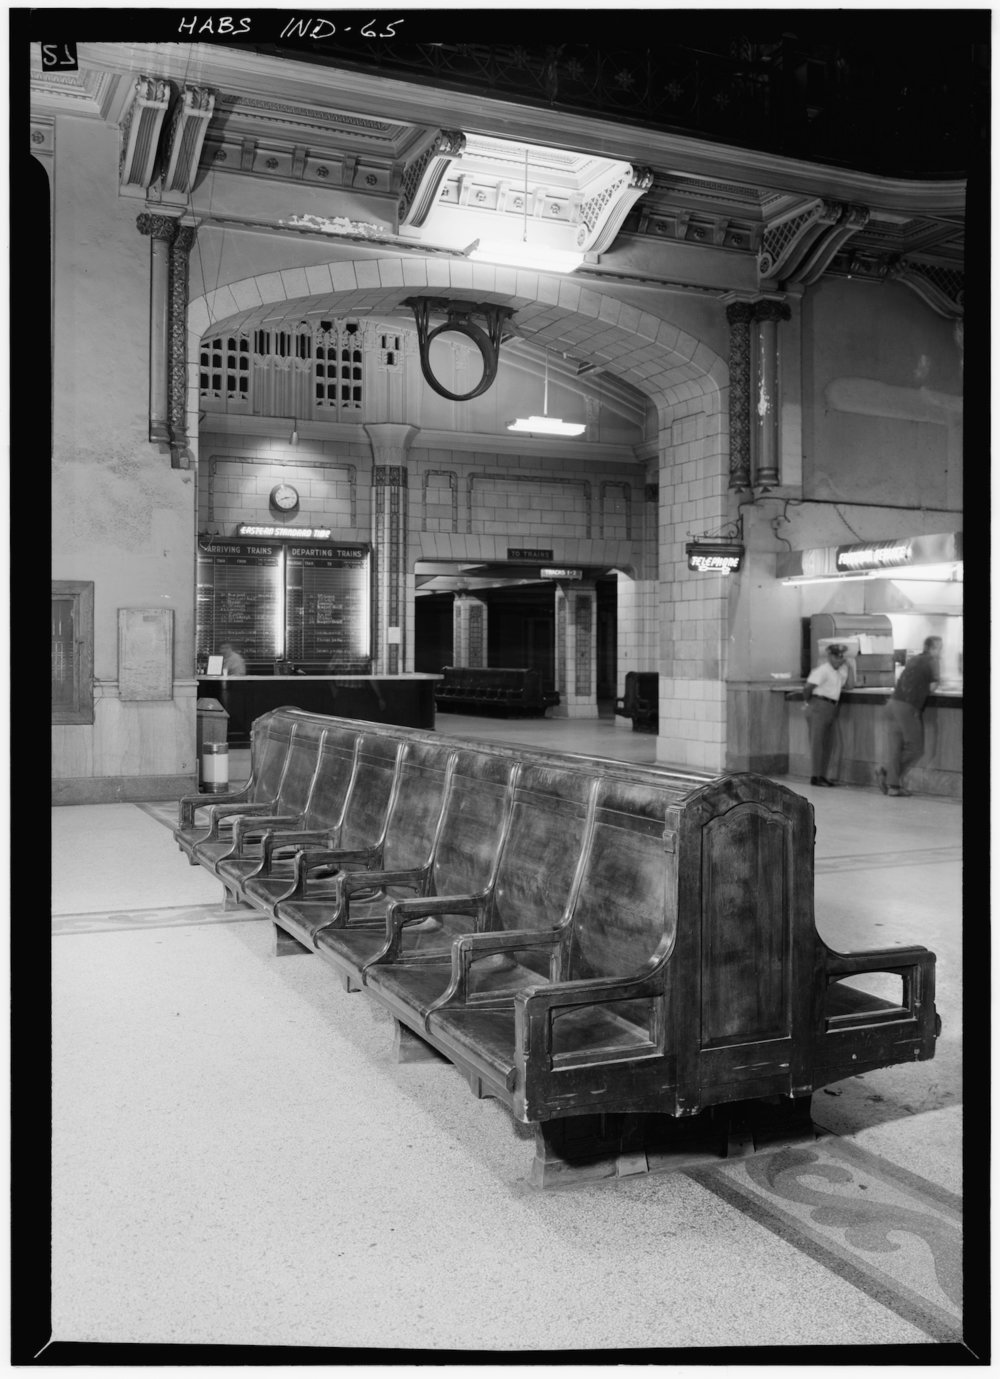  Waiting Room at Union Station, Jackson Place &amp; Illinois Street, Indianapolis, Ind. (Aug. 1970). Image via Library of Congress. 